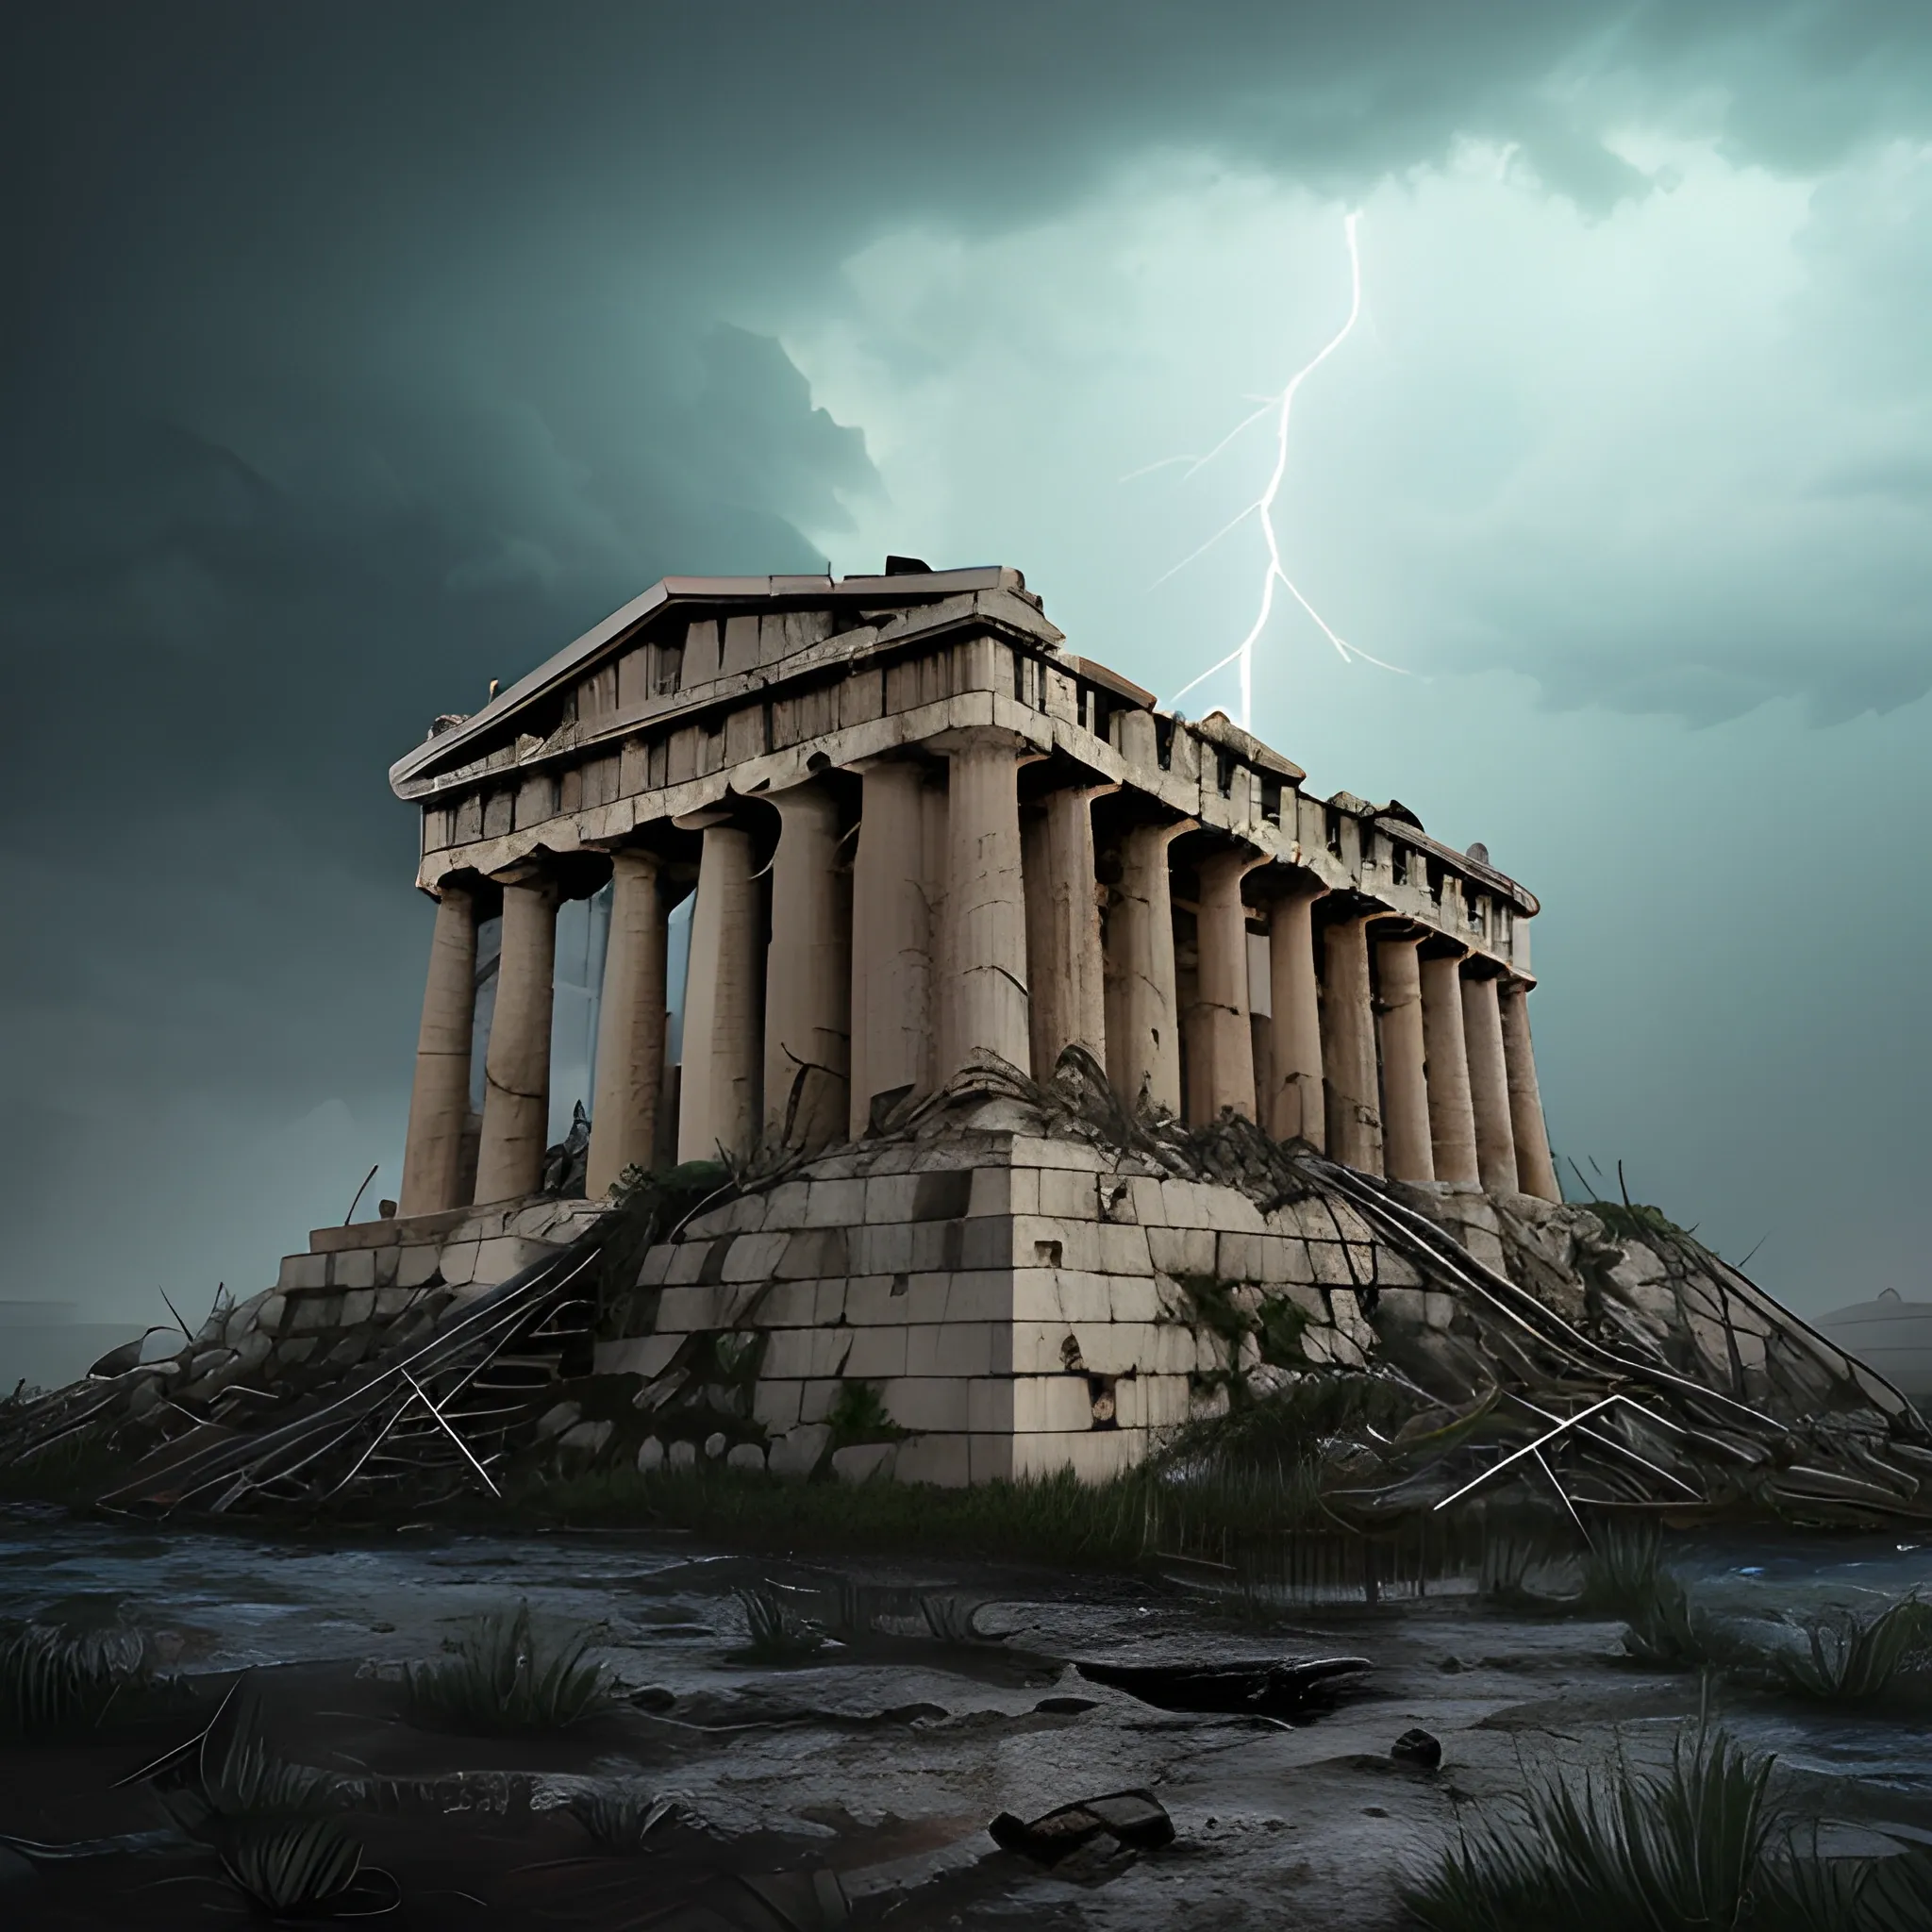 city of acropolis, on a high mountain, destroyed city, surrounded by clouds, dark environment, place of terror, dim lights, destruction, rot, night, darkness, dead vegetation, moor, rotten fauna, dry trees, burned grass, dead grass, barren plants, burned trees, rain, rainy weather, storm, strong storm, wind raising sand, rainy environment, thunder, lightning, dim lights, water falling from the sky, terror, dark moon, darkness, ruins, destroyed, death, details ancient greece architecture, detailed environment, hyper realistic, destroyed city, decay, rot, 8k details, wide angle, 3d, panoramic view, slasher style